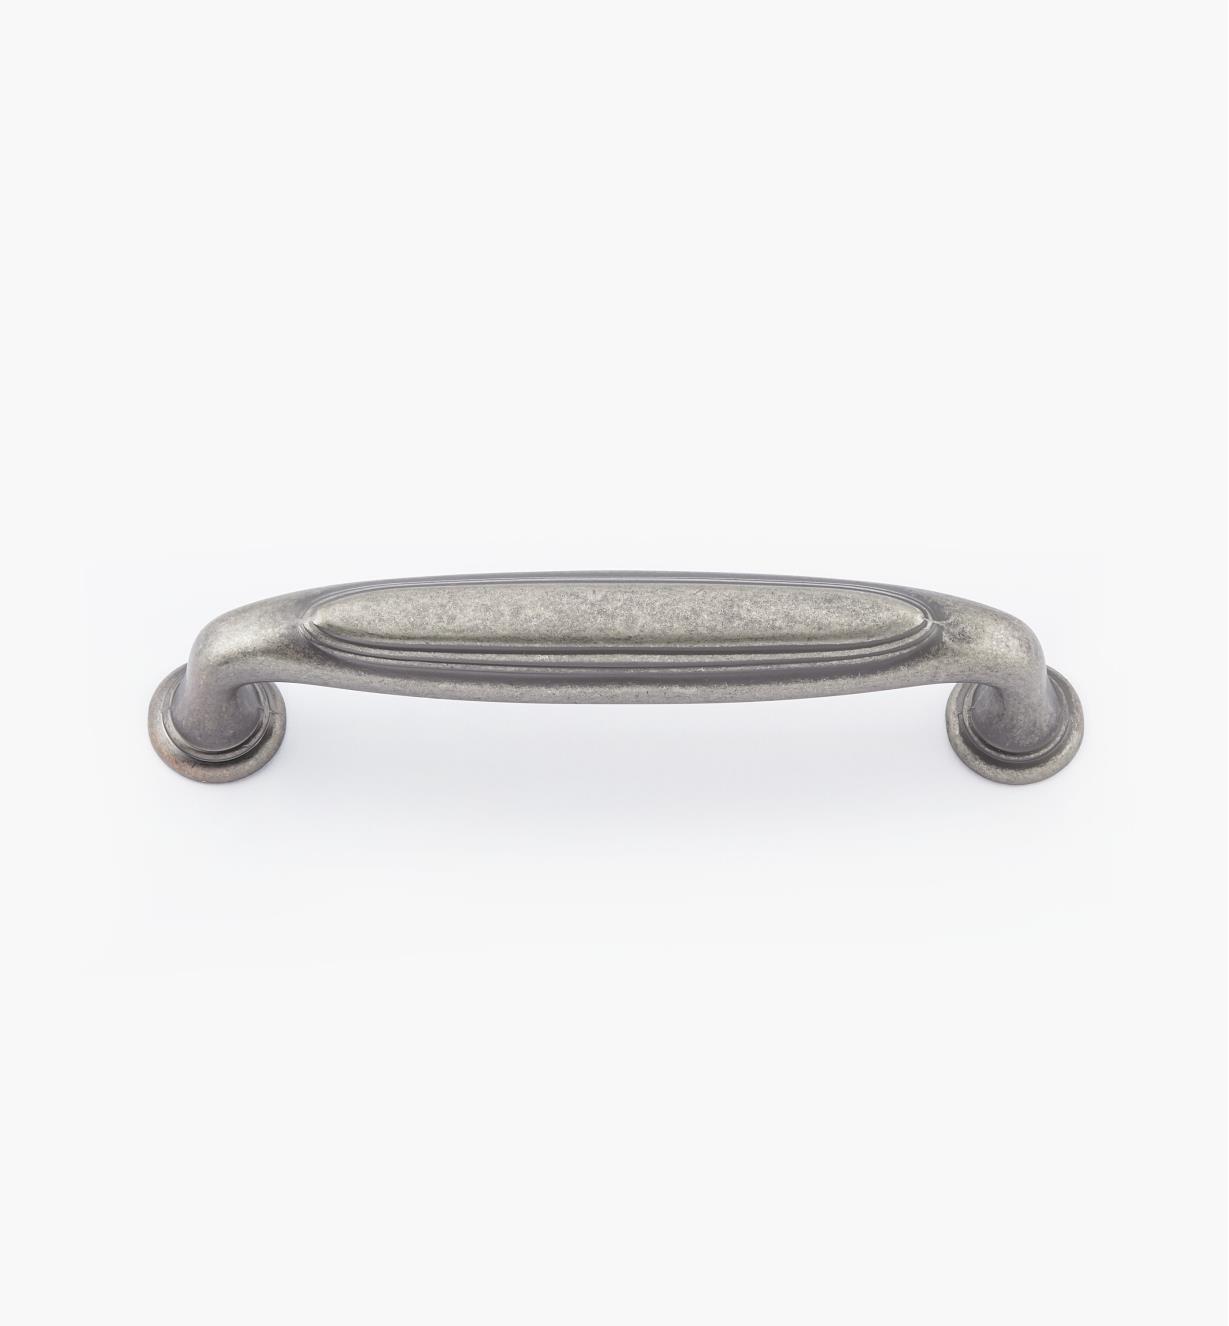 02A4562 - 96mm Weathered Nickel Handle